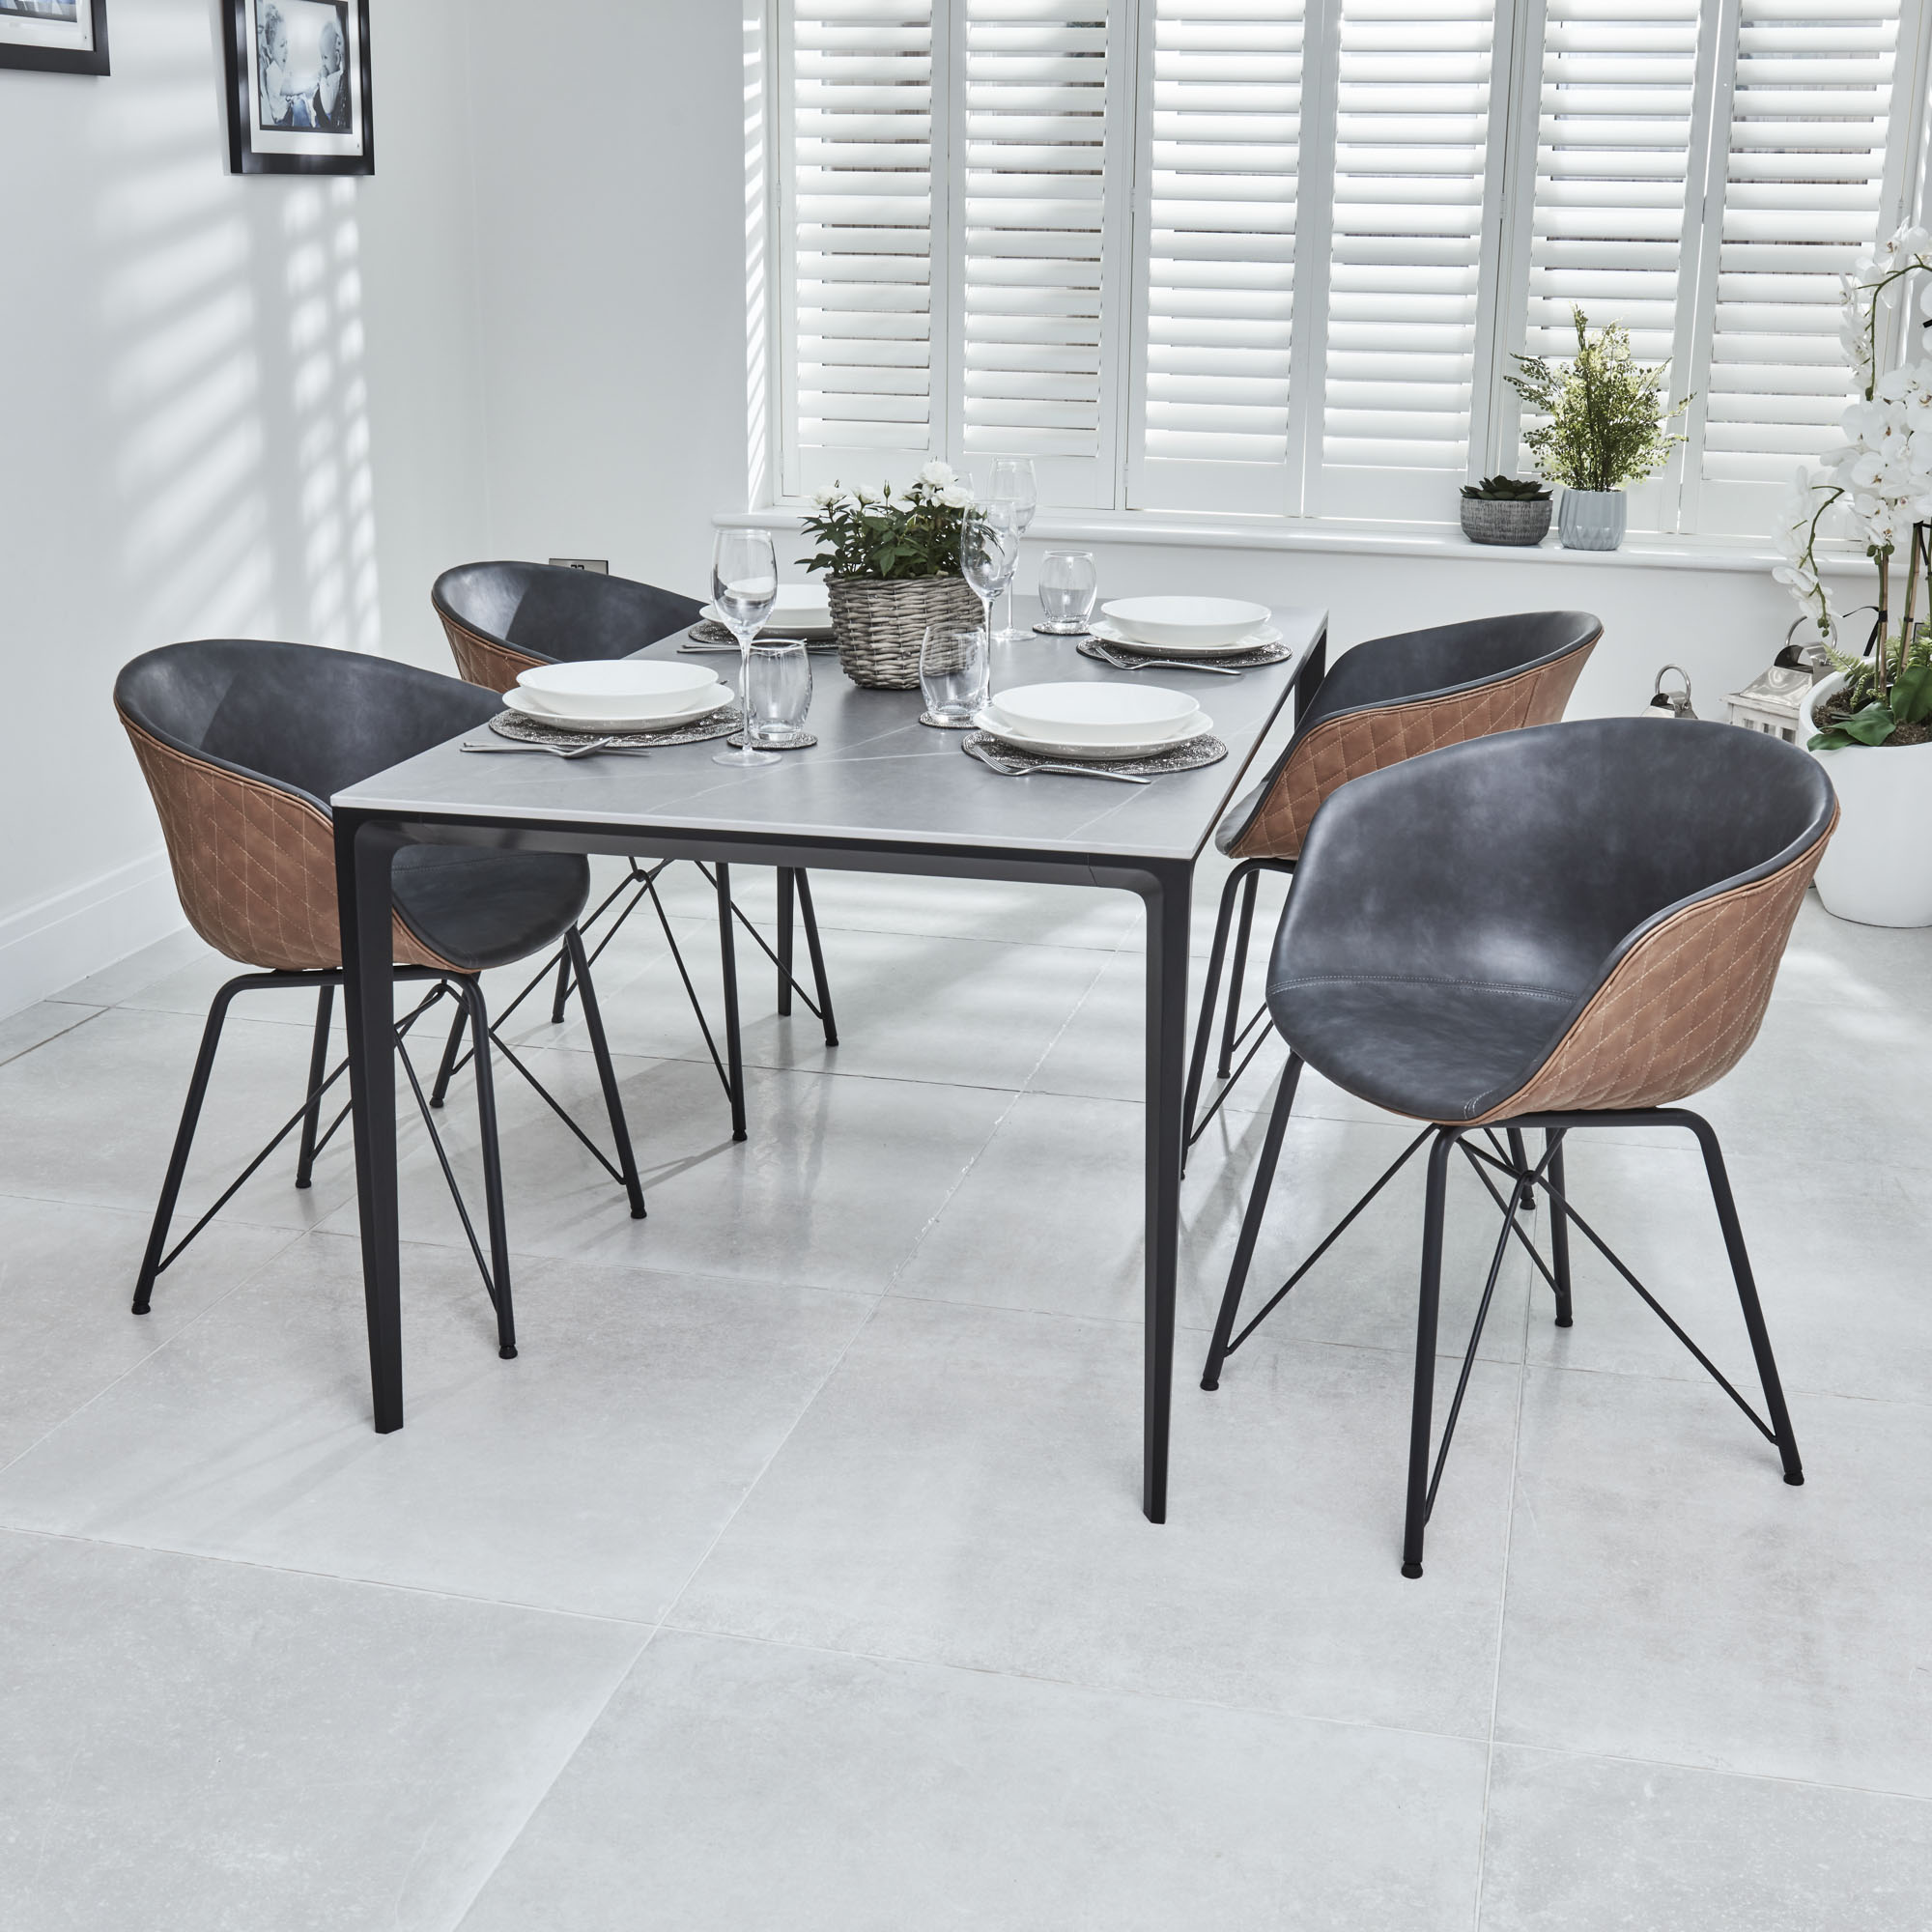 Bellagio 1.6M Grey Sintered Stone Dining Table Set with 4x Camila Grey/Tan Dining Chairs